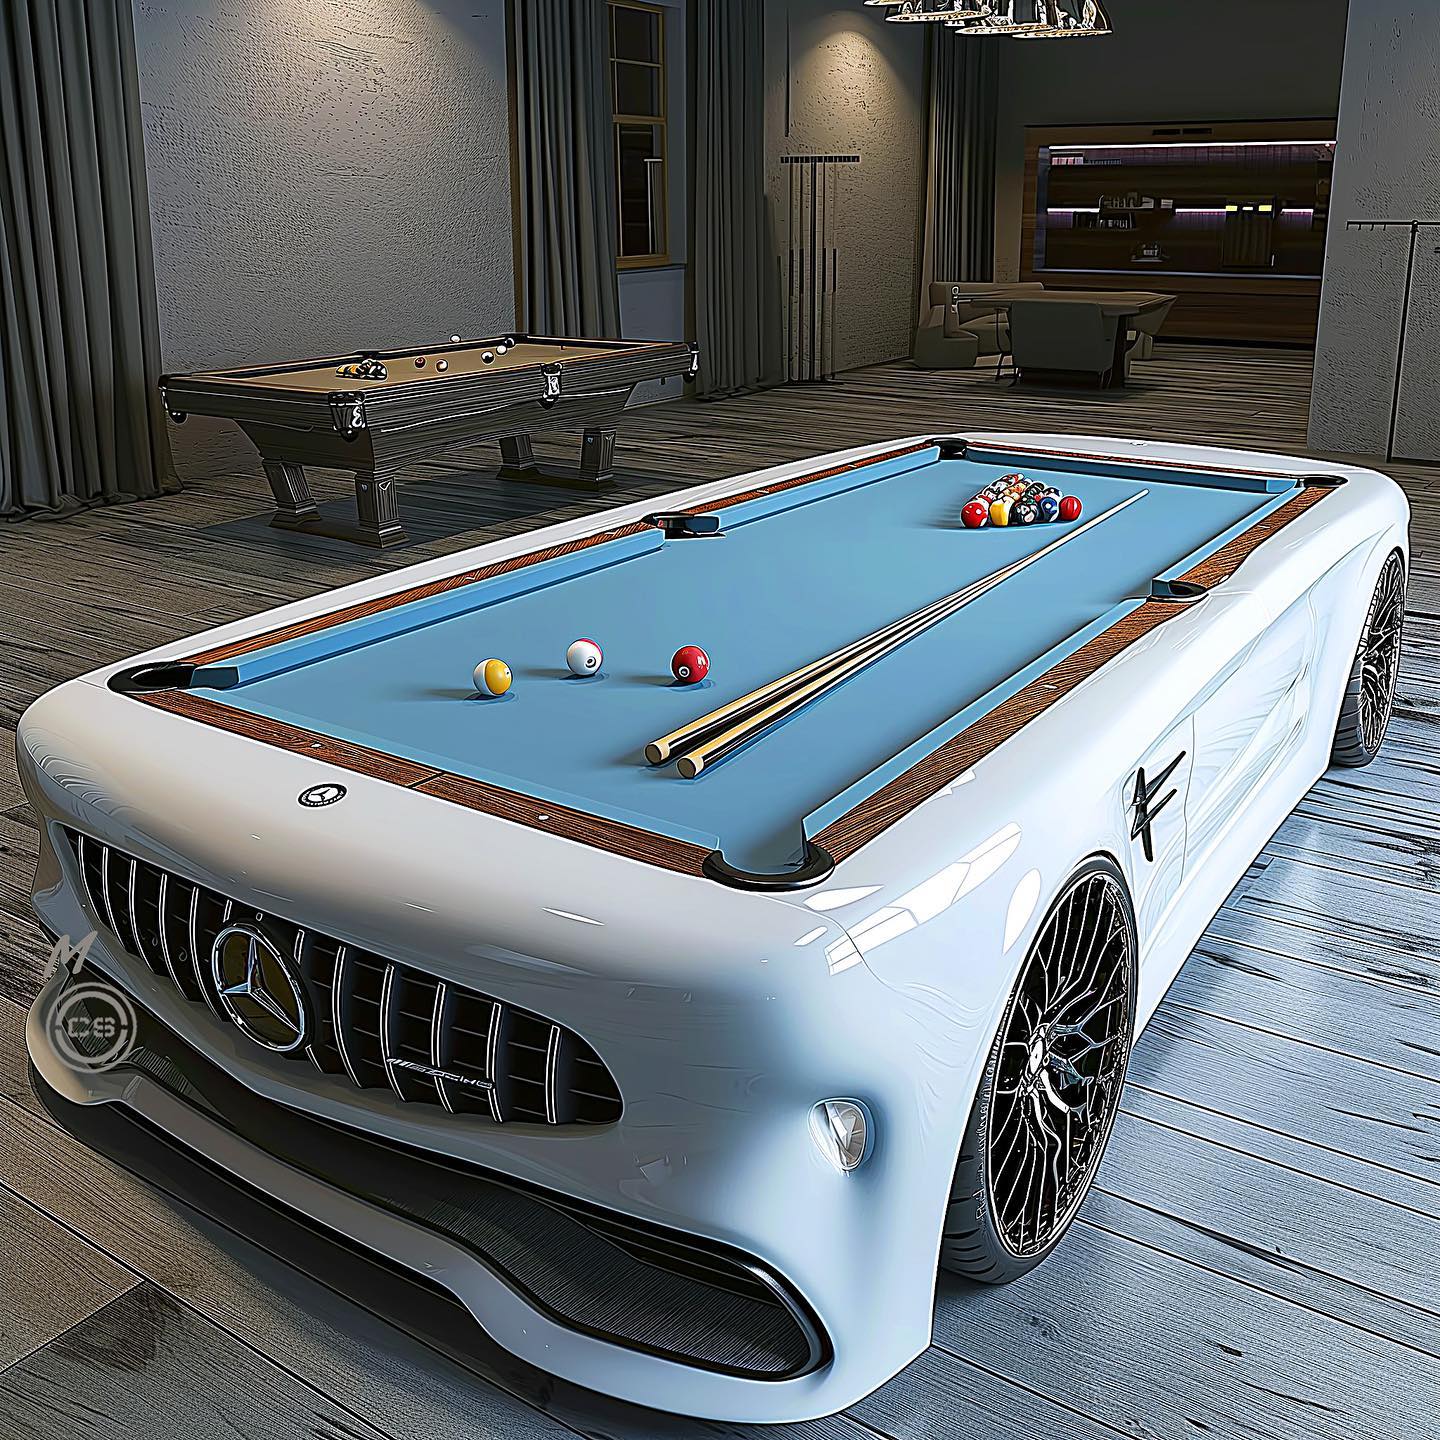 Design Features of Luxury Car-Inspired Pool Tables